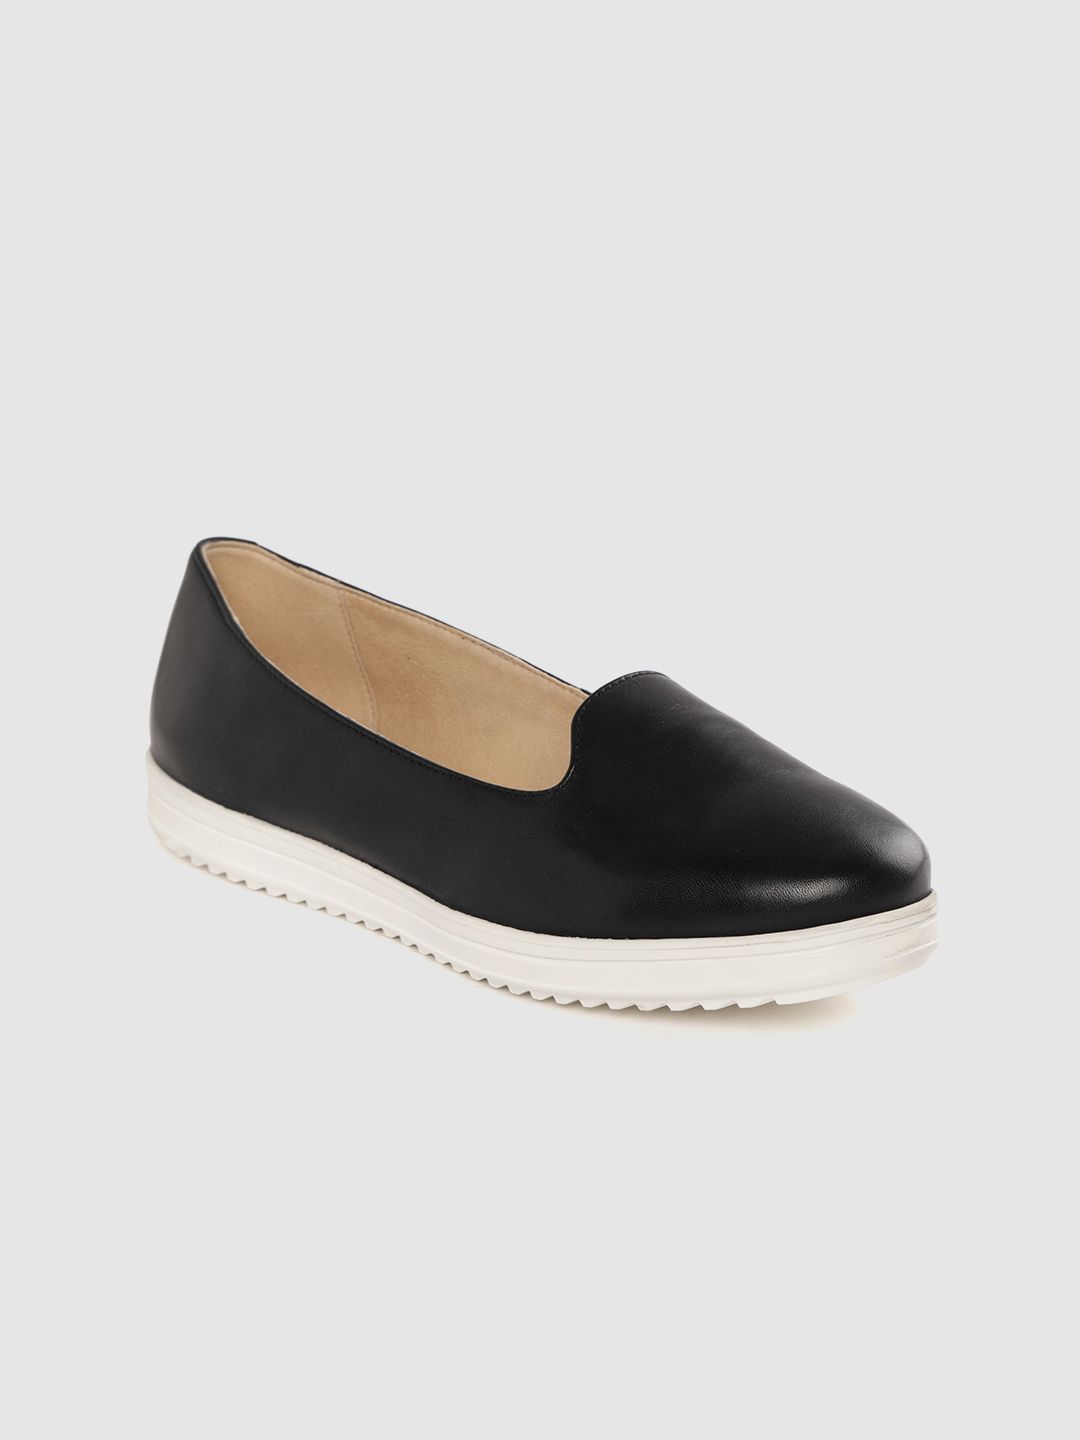 Geox Women Black Leather Slip-Ons Price in India